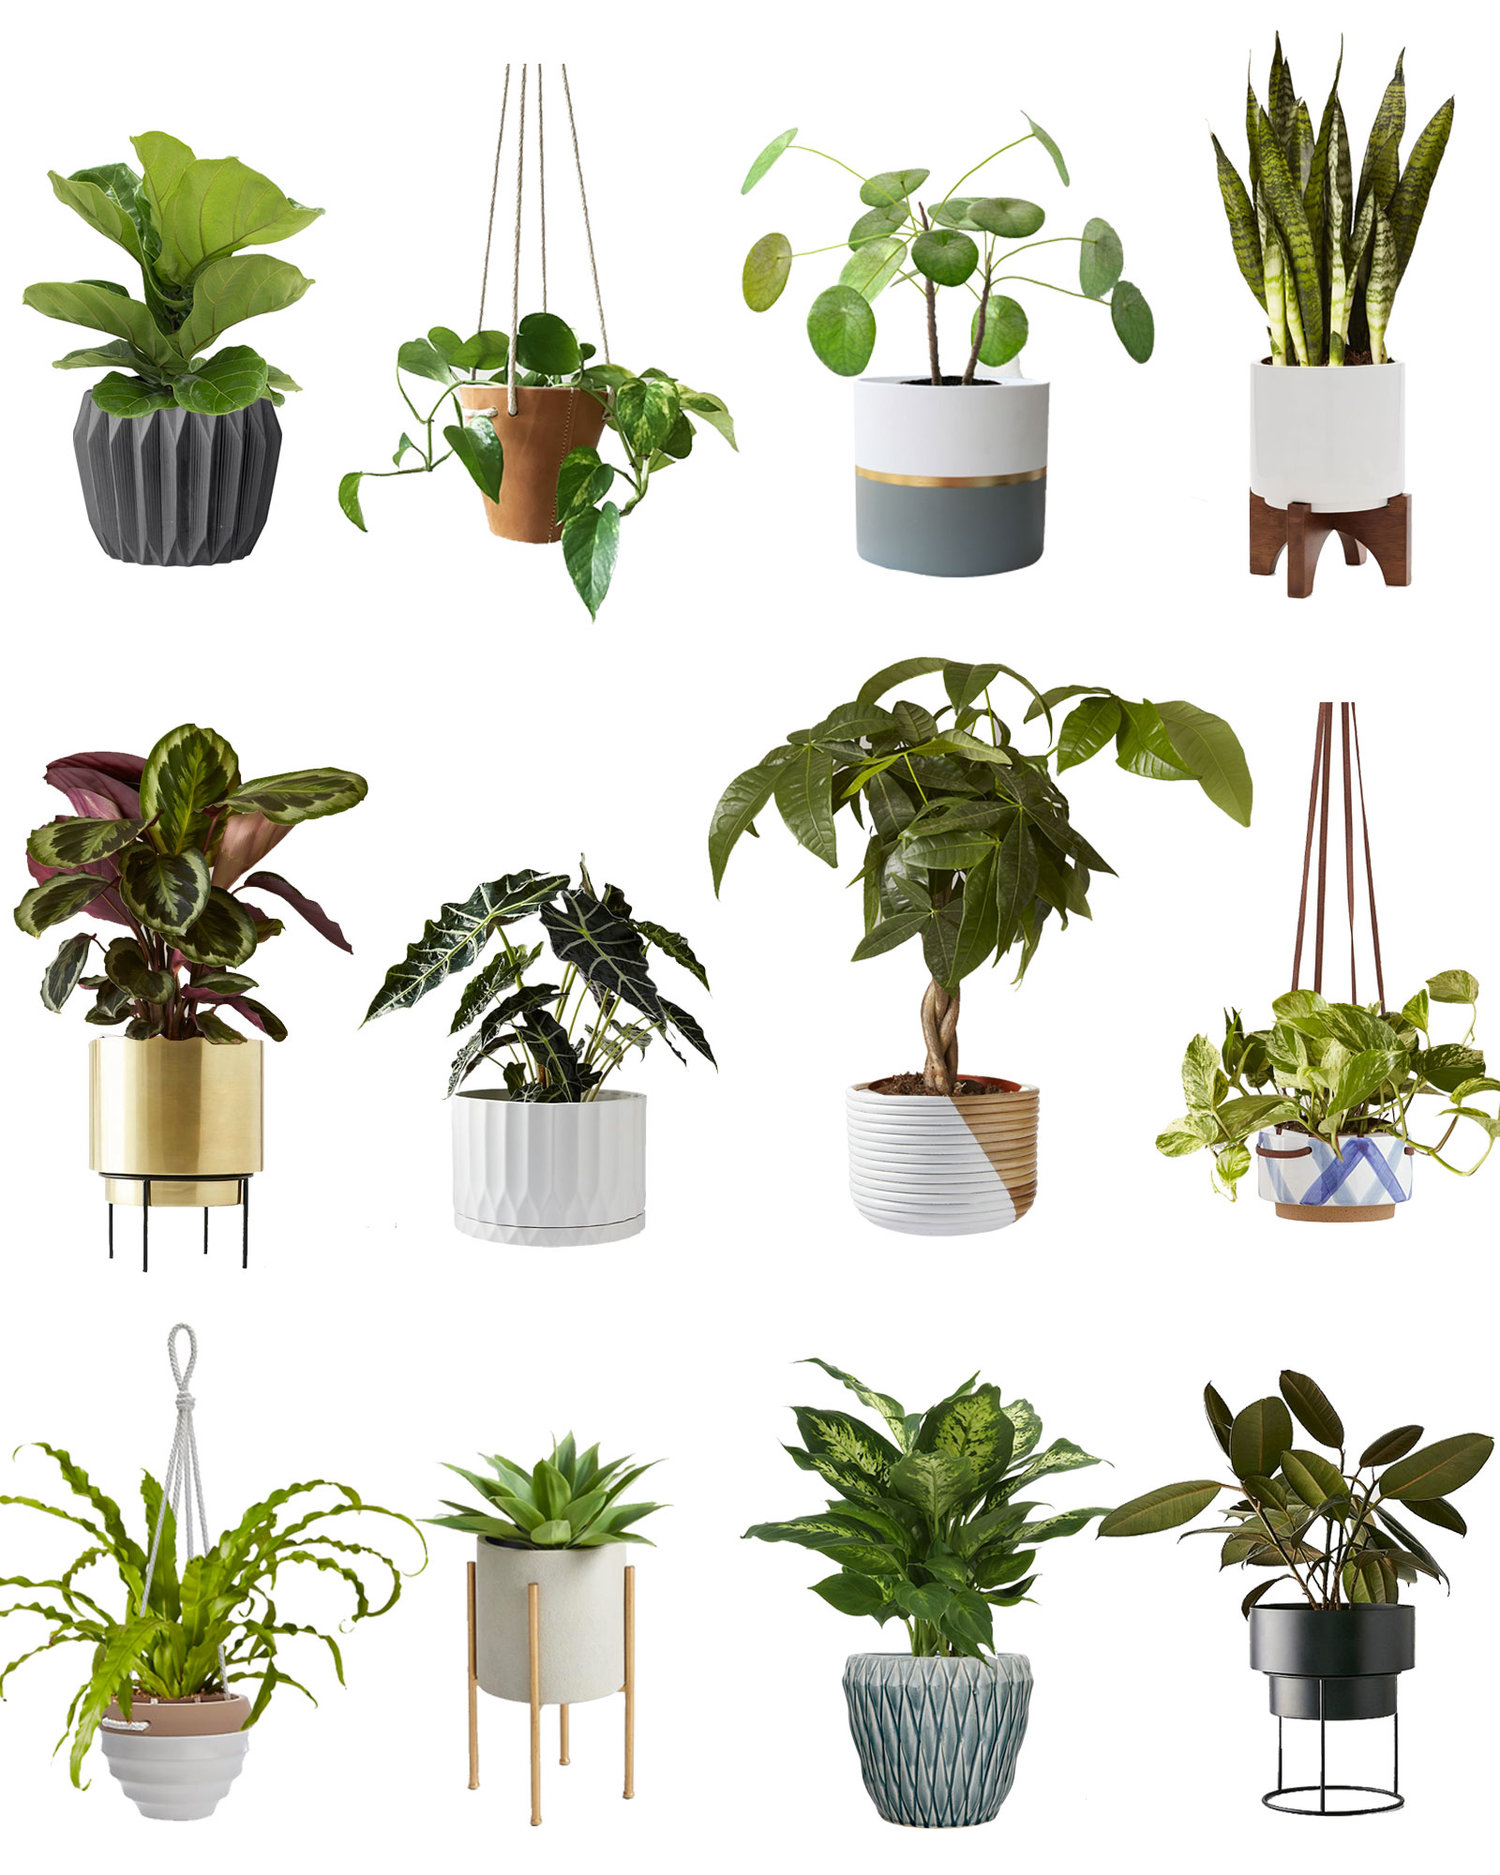 12 modern planters and how to pick the right one for your plant